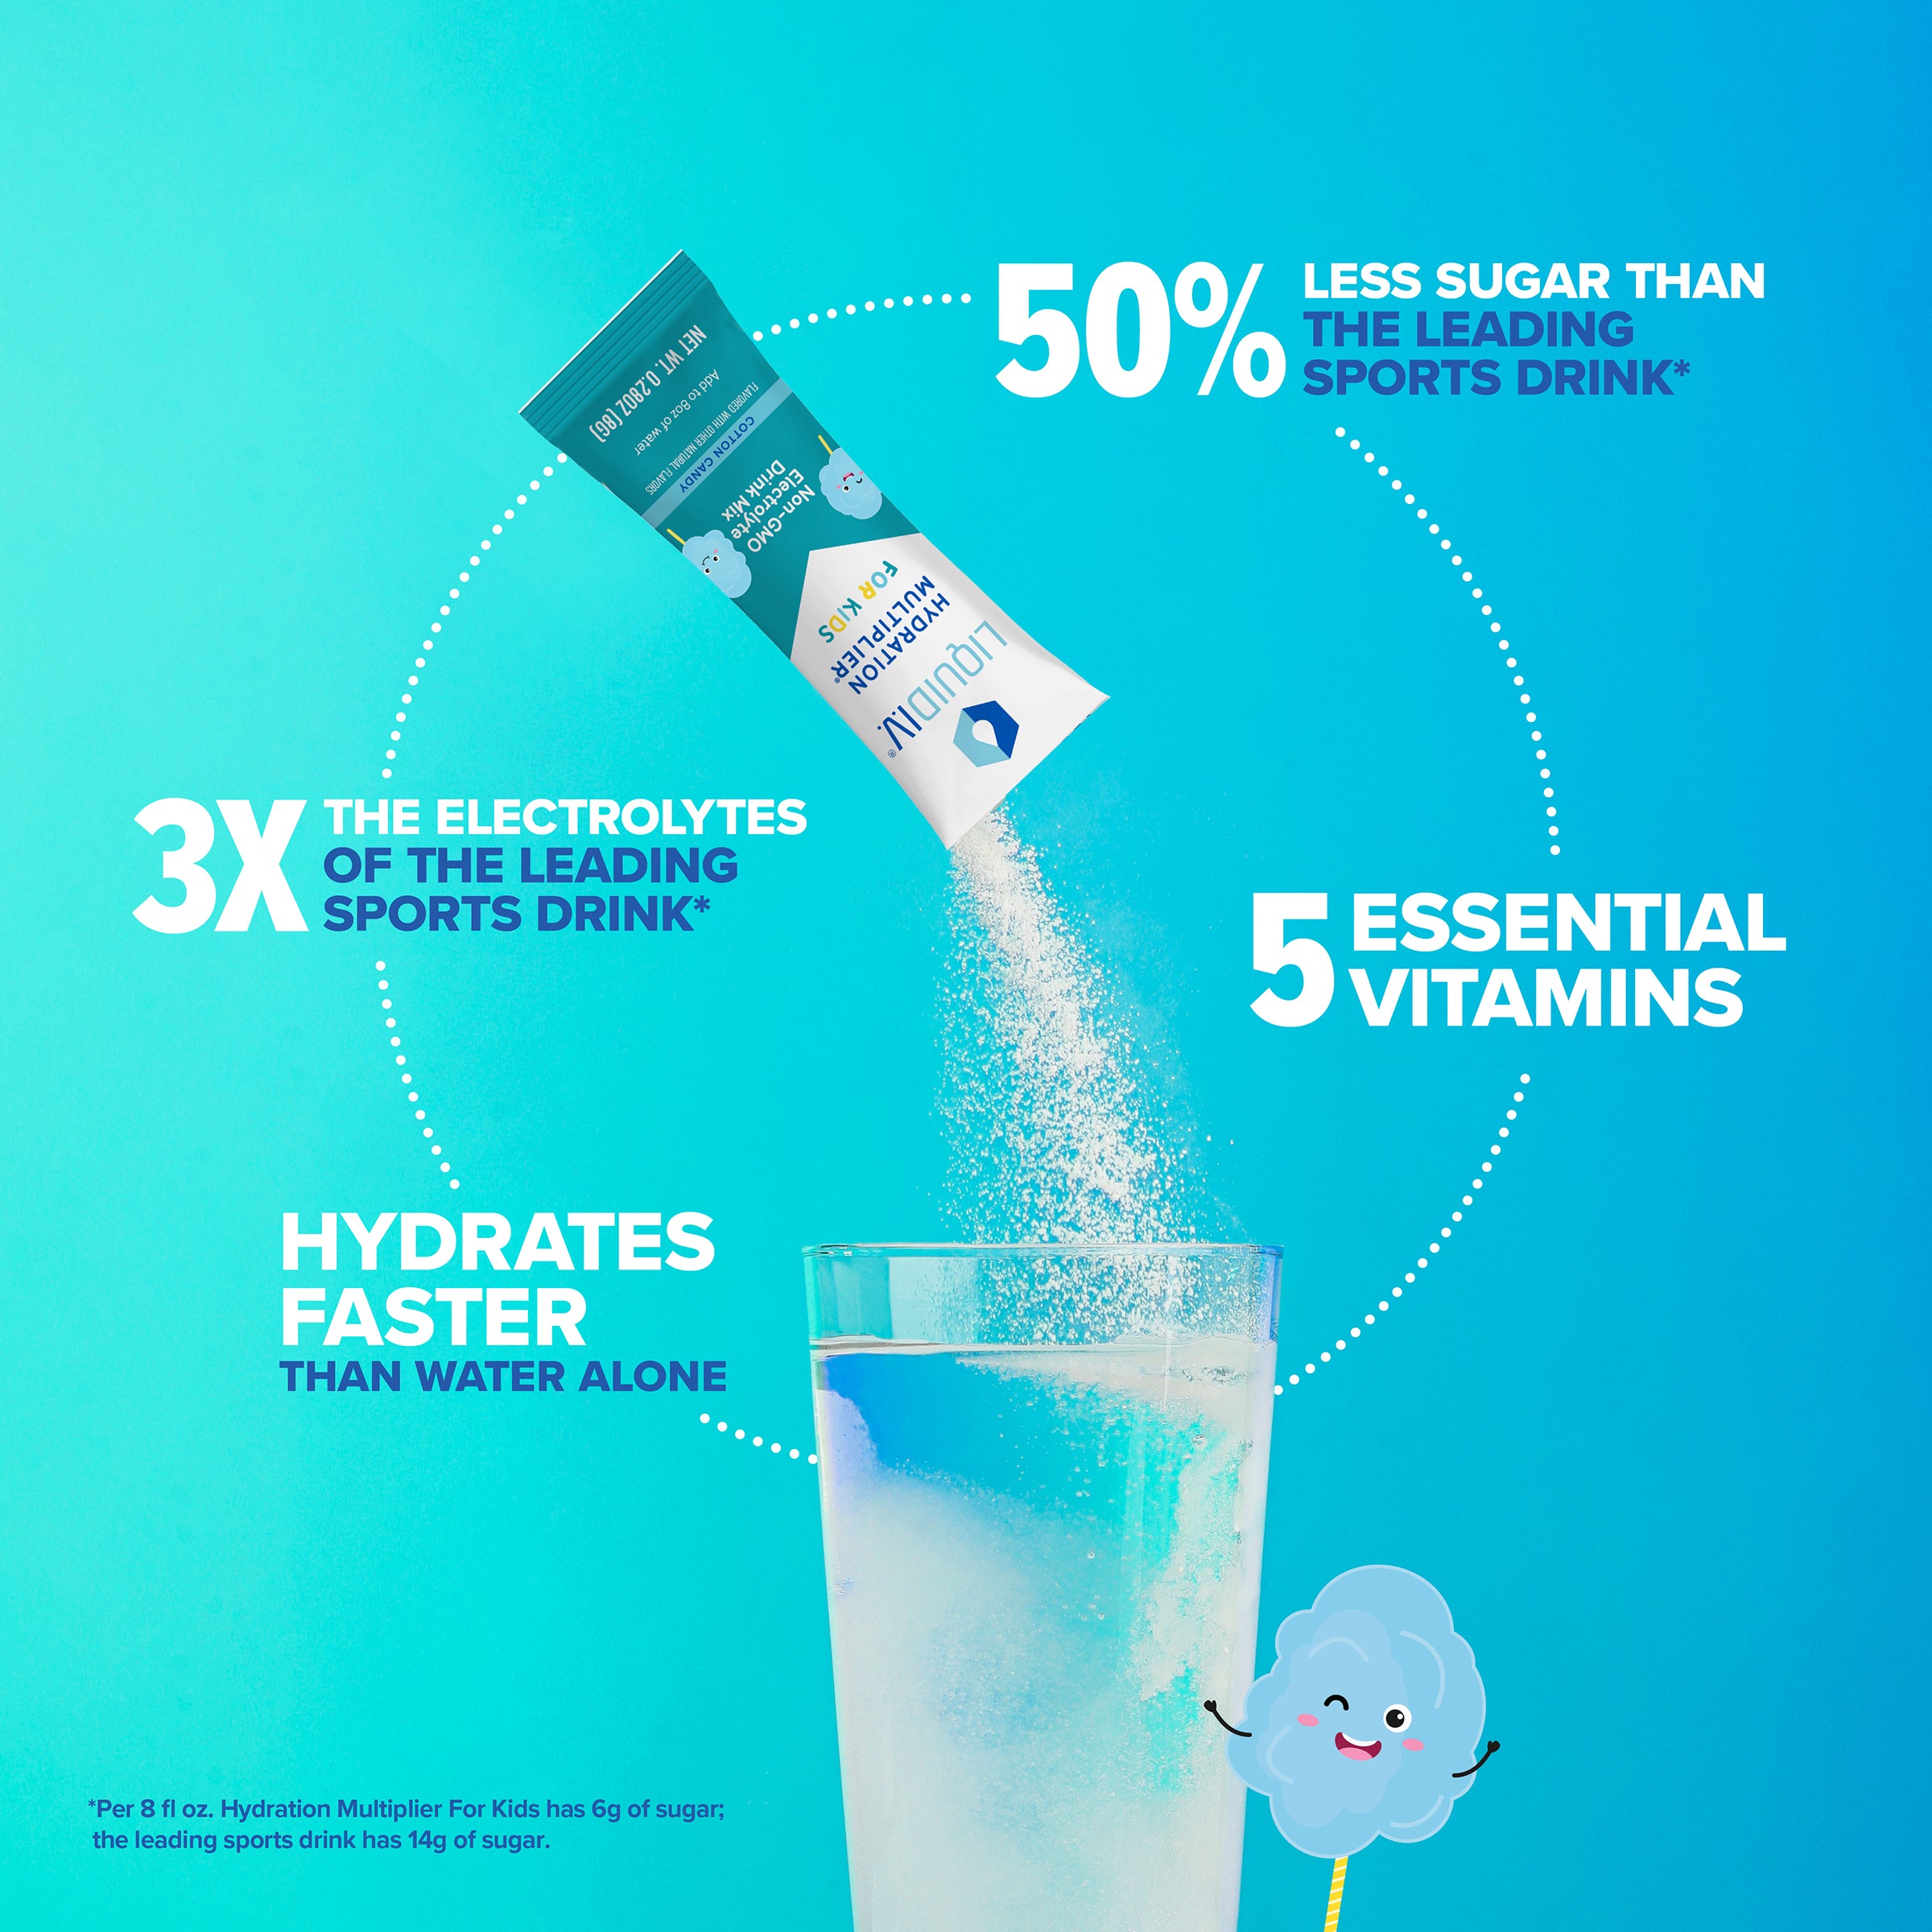 Liquid I.V. - Faster Hydration Than Water Alone